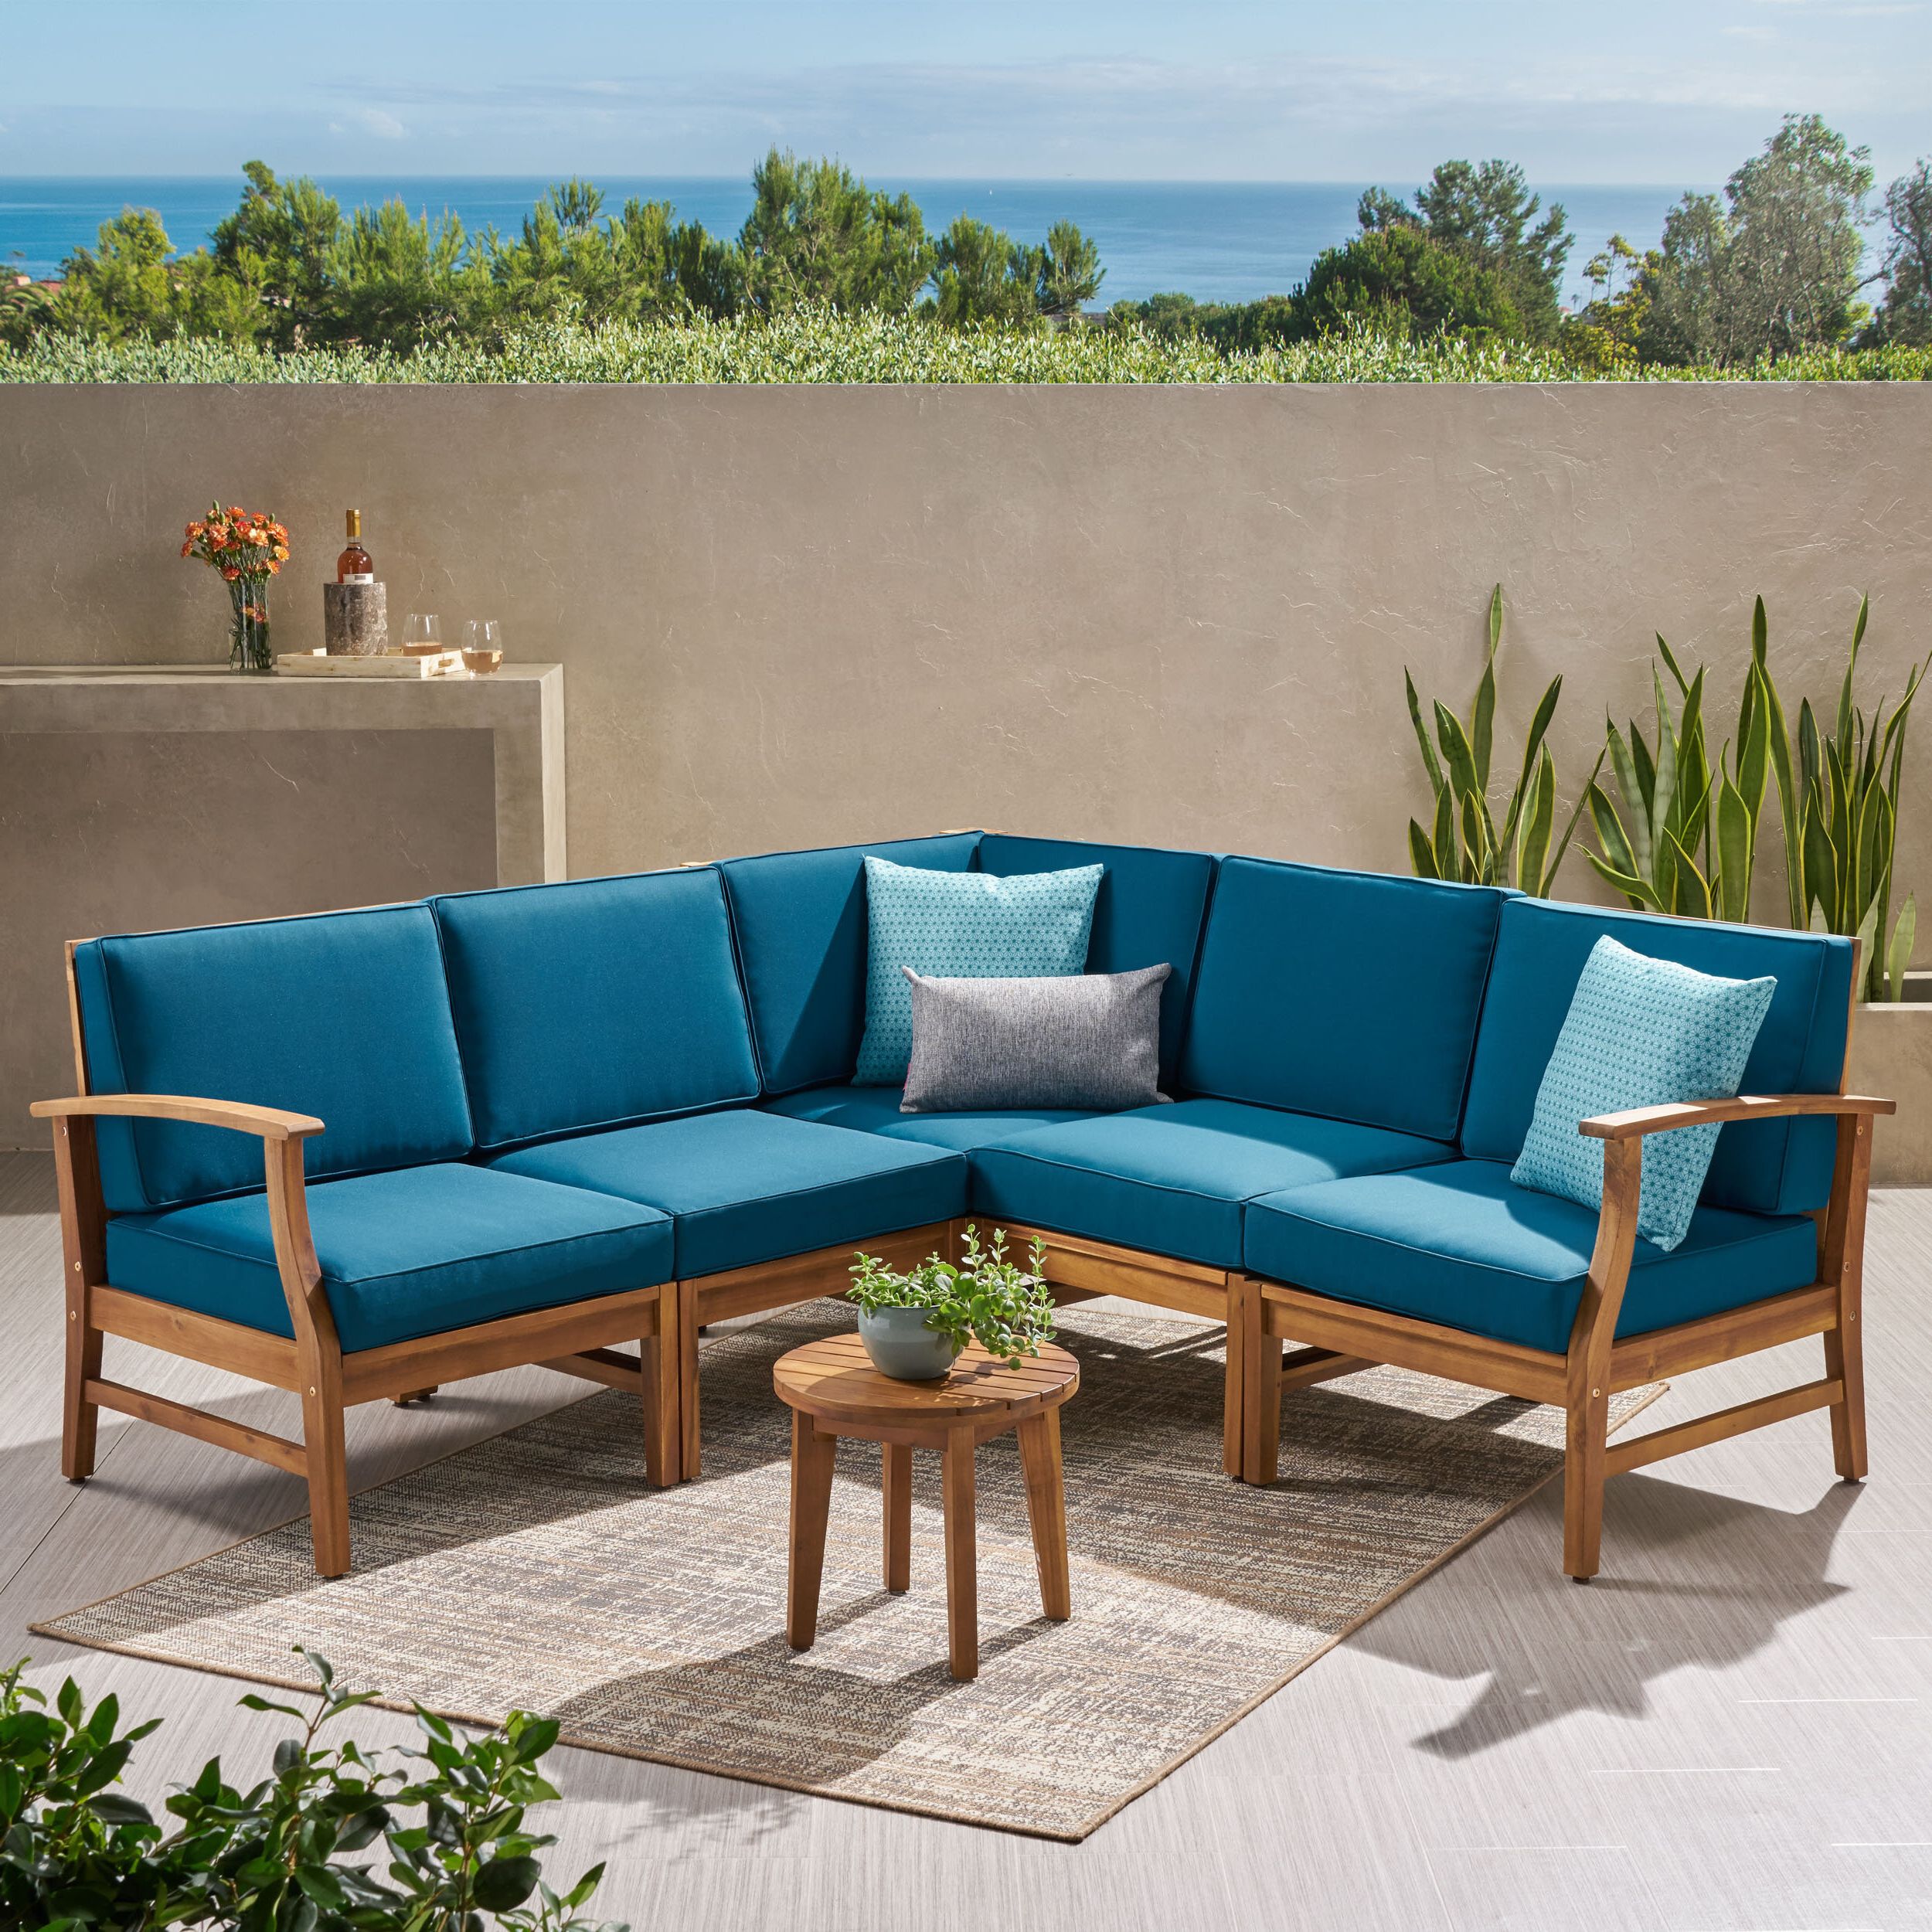 Antonia Teak Patio Sectional With Cushions With Regard To Most Recent Catalina Outdoor Right Arm Sectional Pieces With Cushions (View 13 of 25)